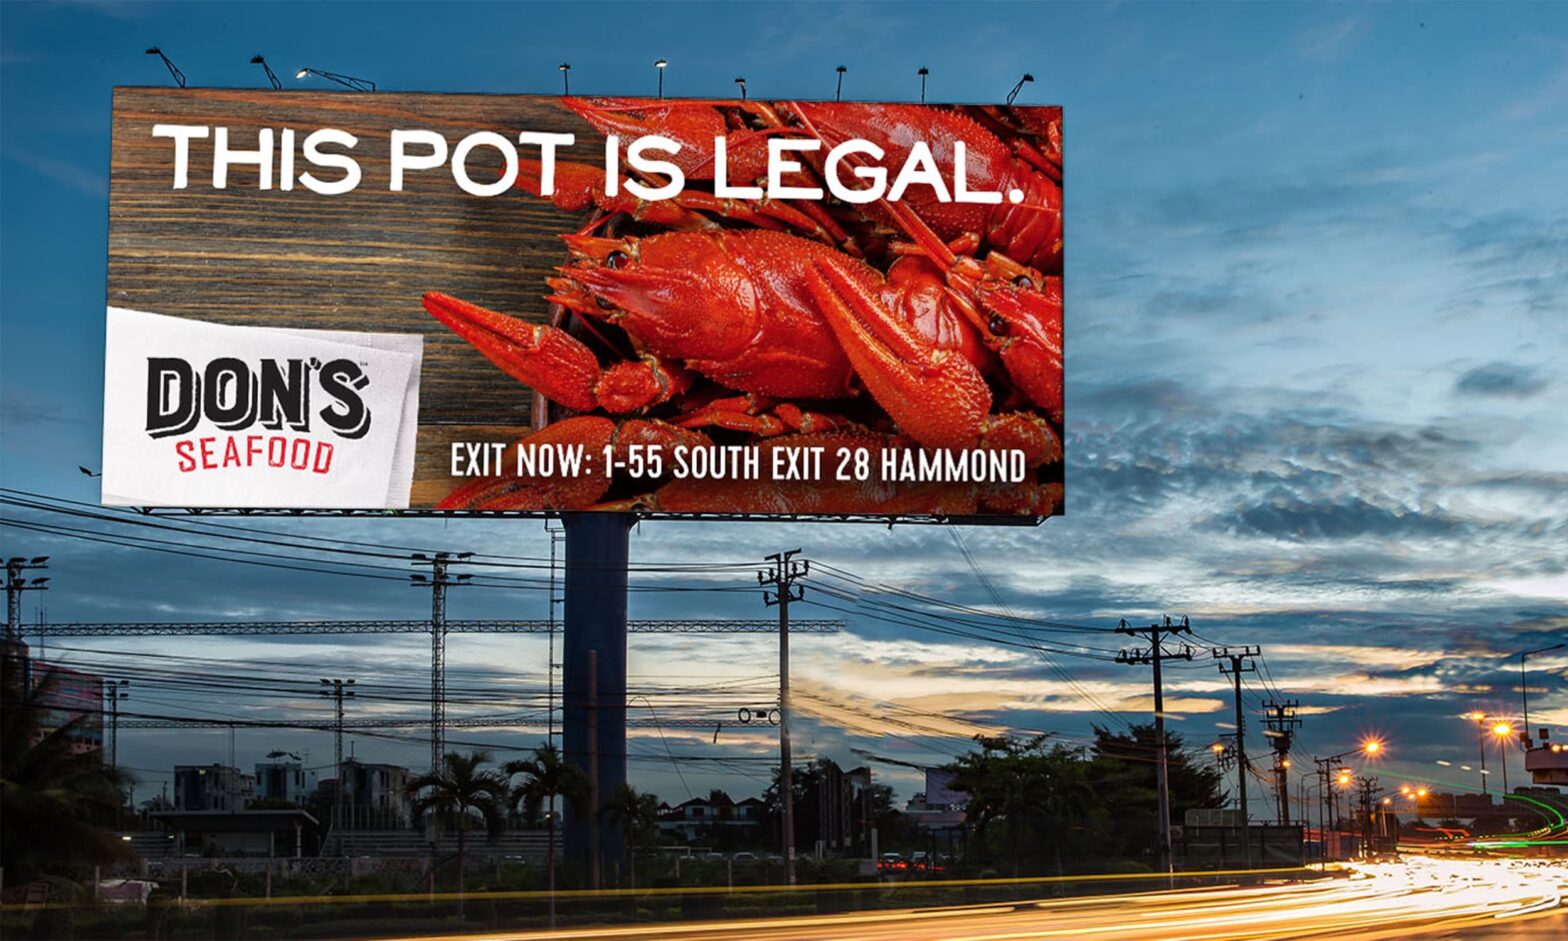 Billboard showing crawfish, captioned "This pot is legal." with directions to a Don's Seafood location